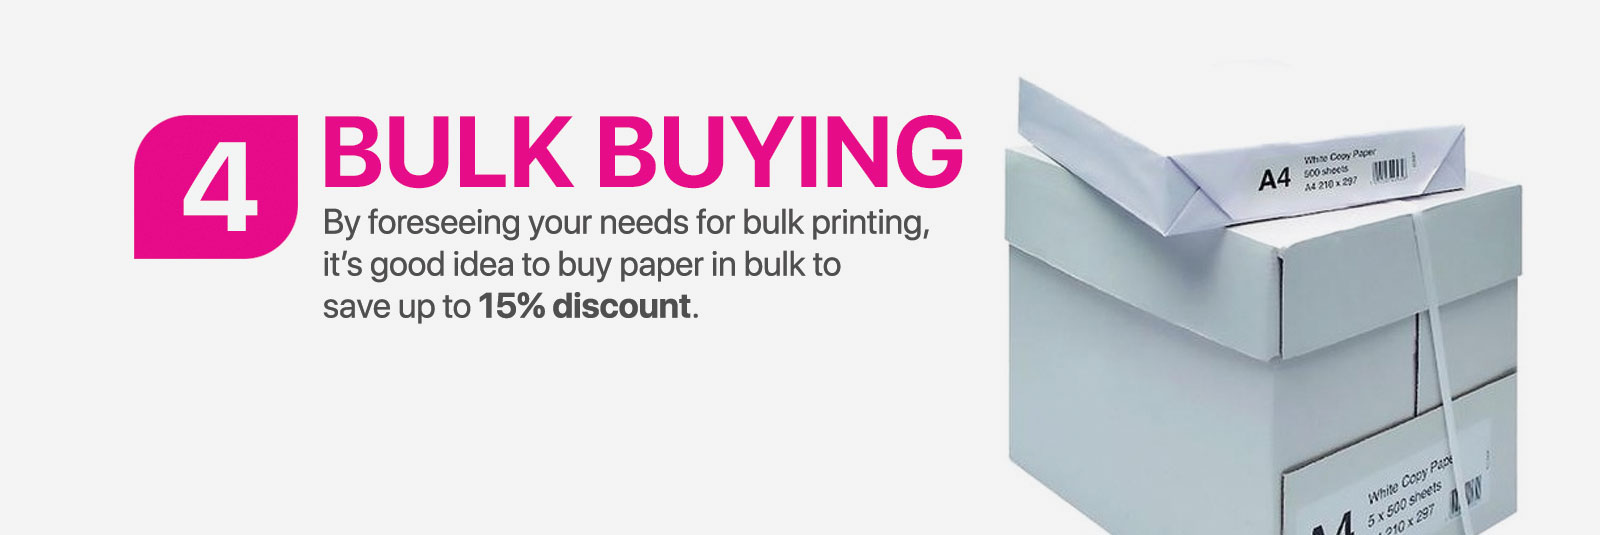 Bulk Buying - By foreseeing your needs for bulk printing, it's good idea to buy paper in bulk to save up to 15% discount.